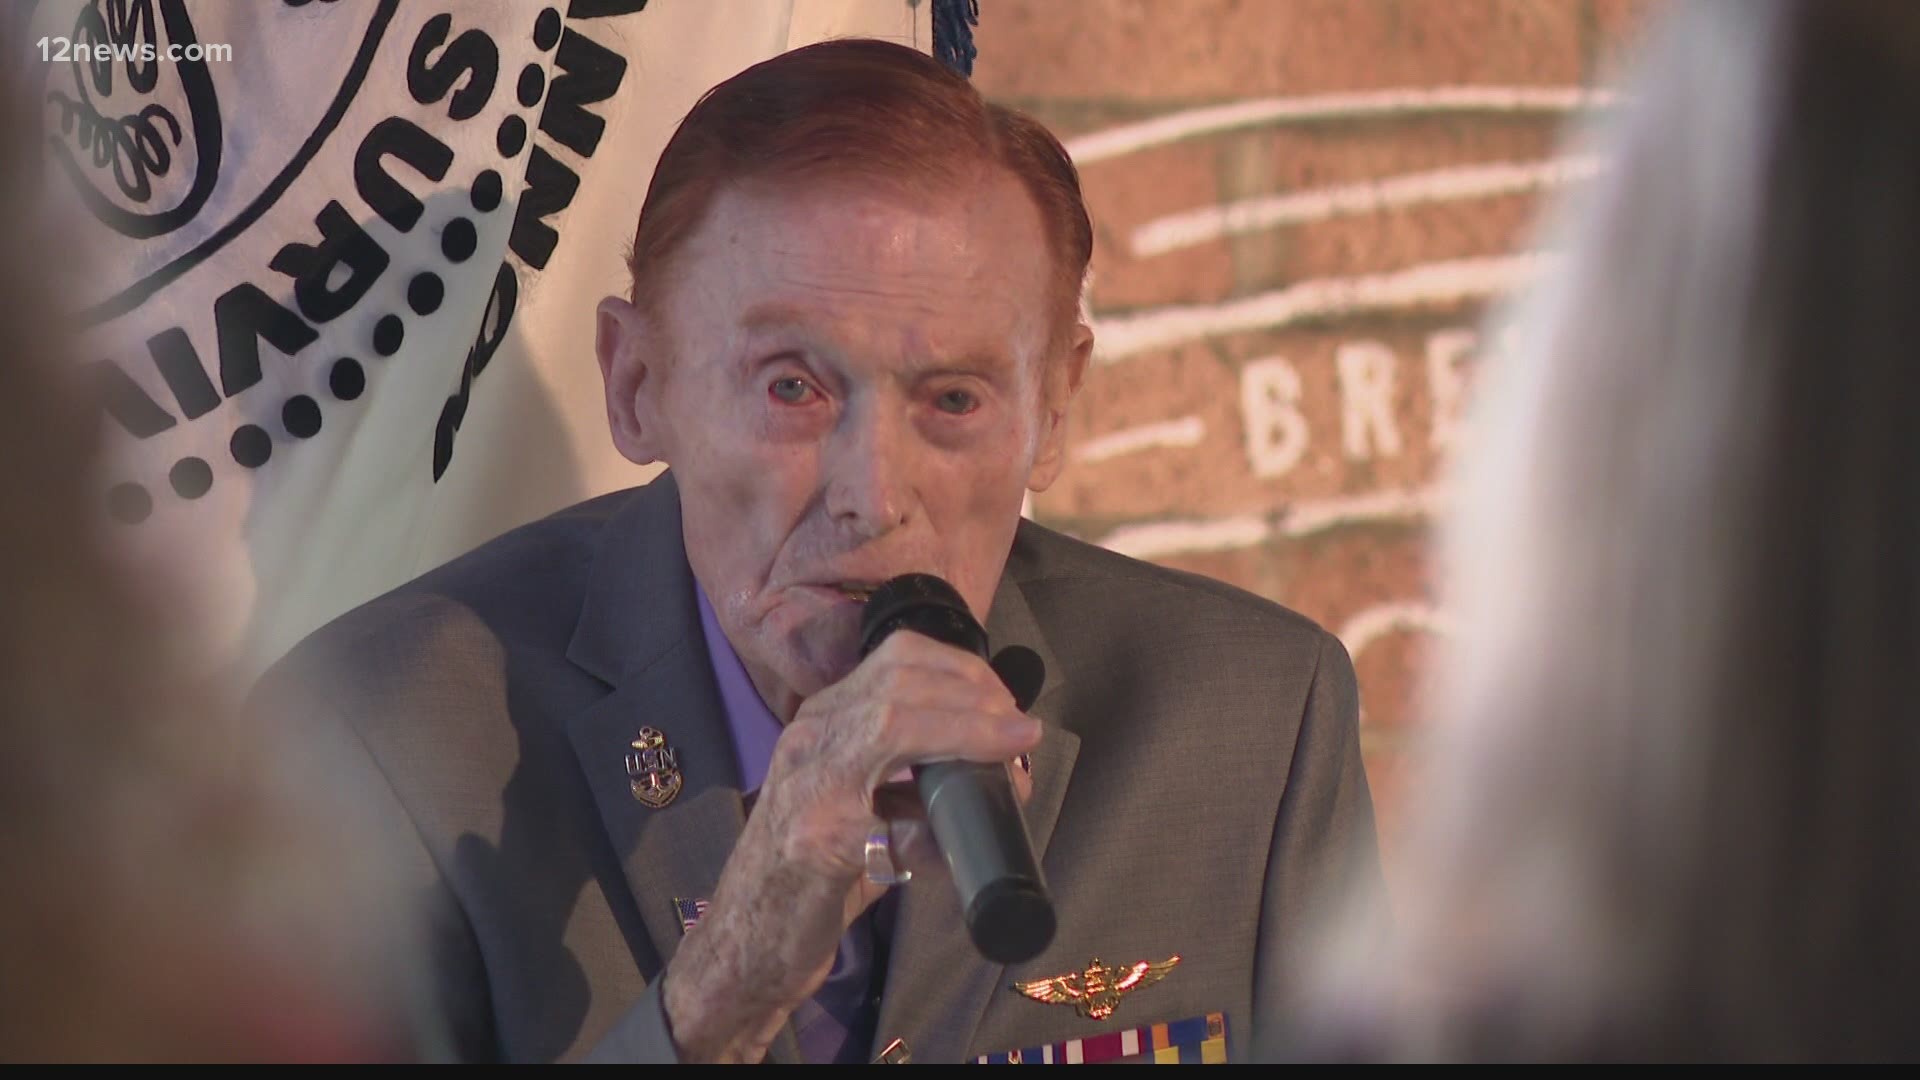 One WWII veteran is working to ensure kids today never forget the sacrifice they made. The 99-year-old is connecting with a local school to share his history.